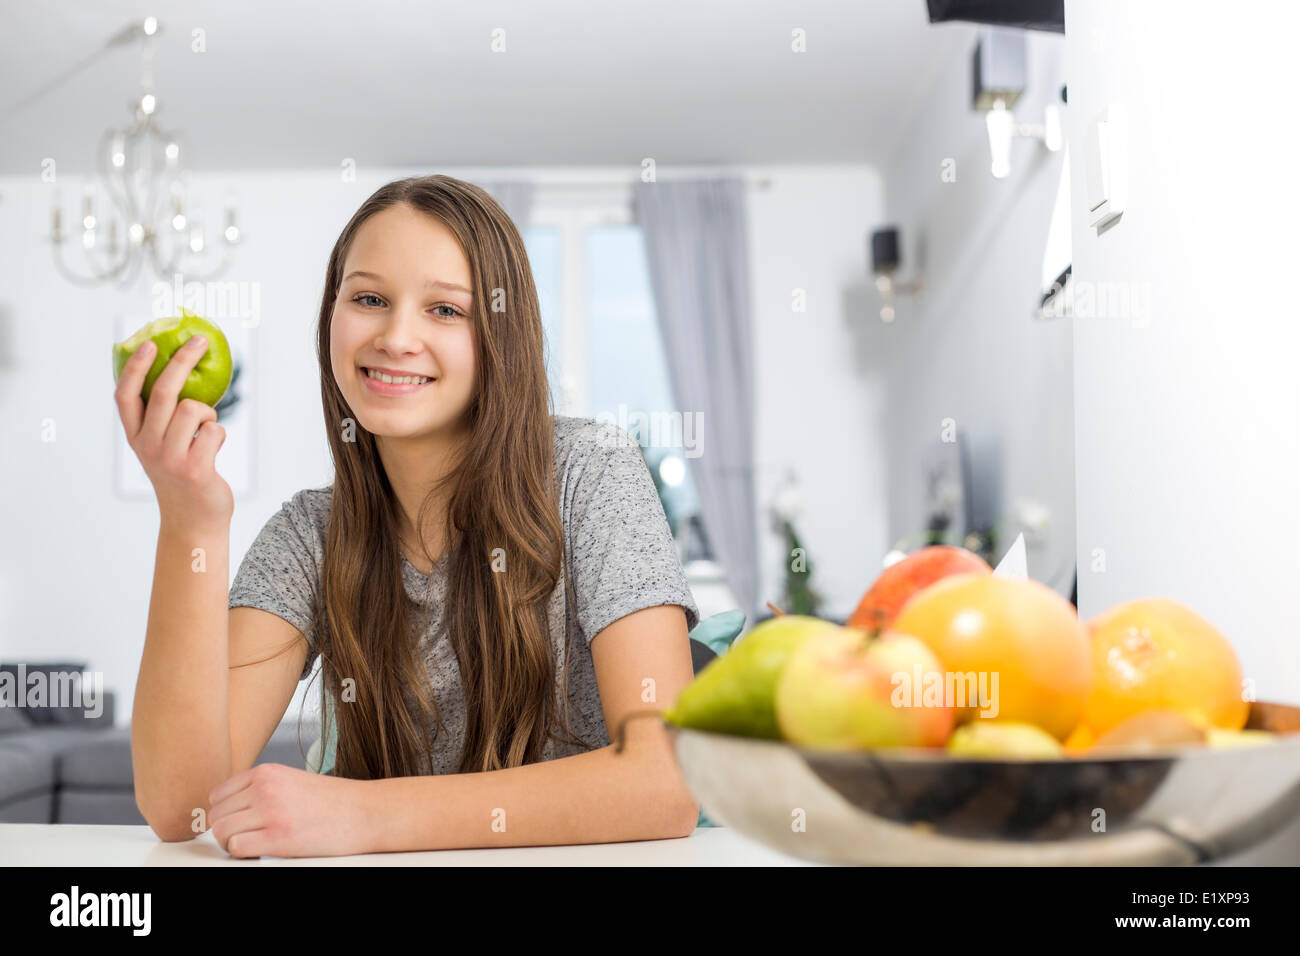 Portrait of smiling girl holding apple while sitting at table in house Stock Photo